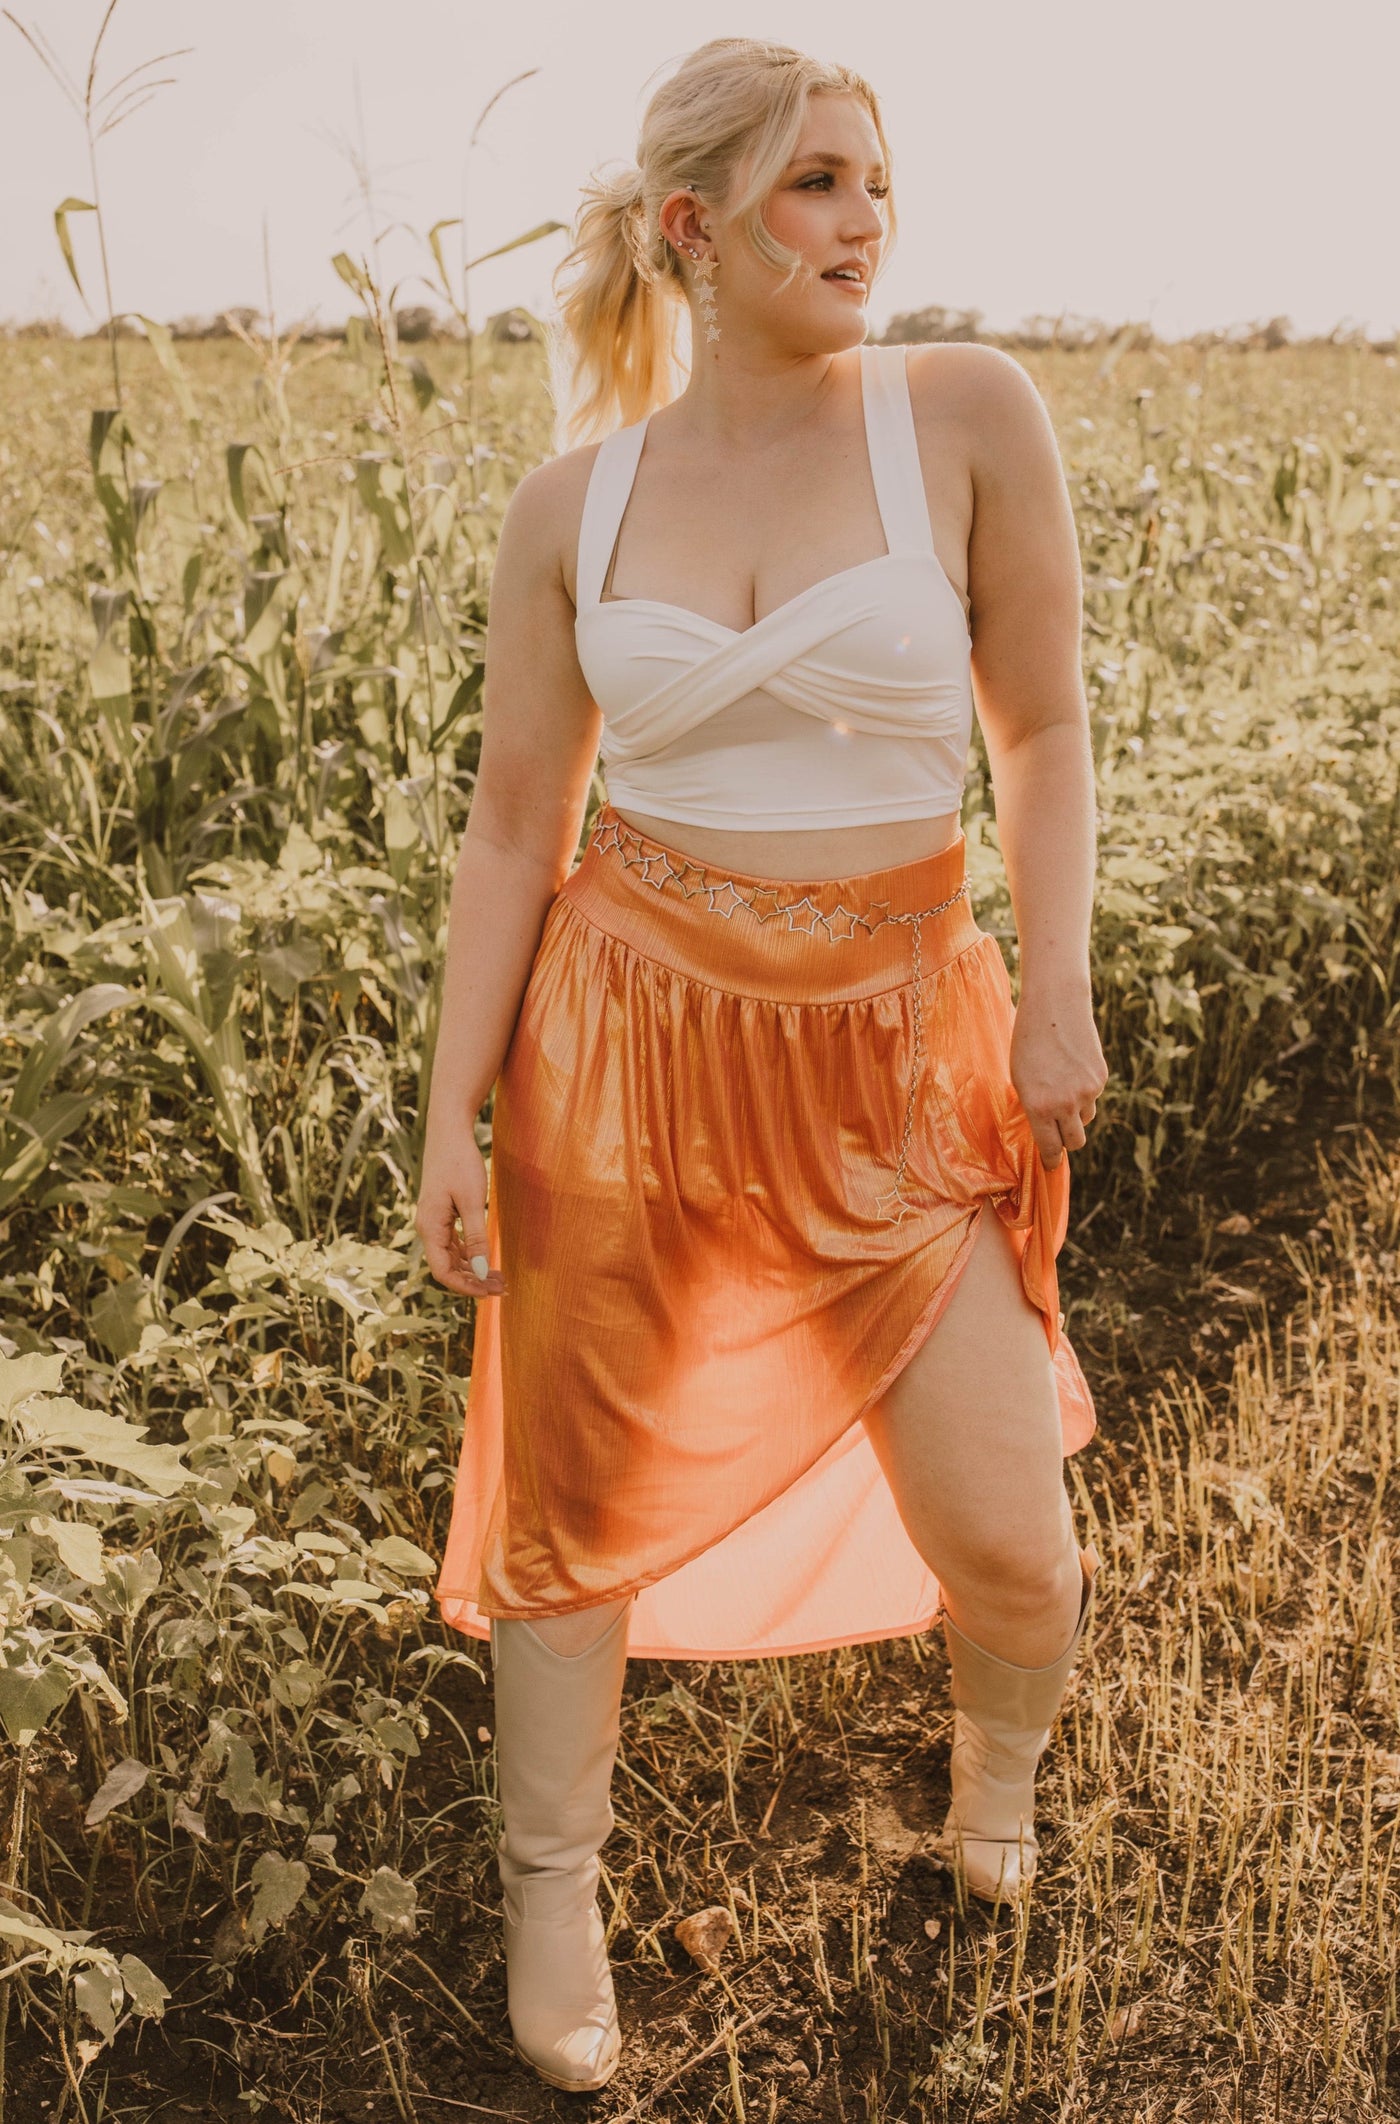 Skirt  Peach Glow Skirt from 2 Fly Co